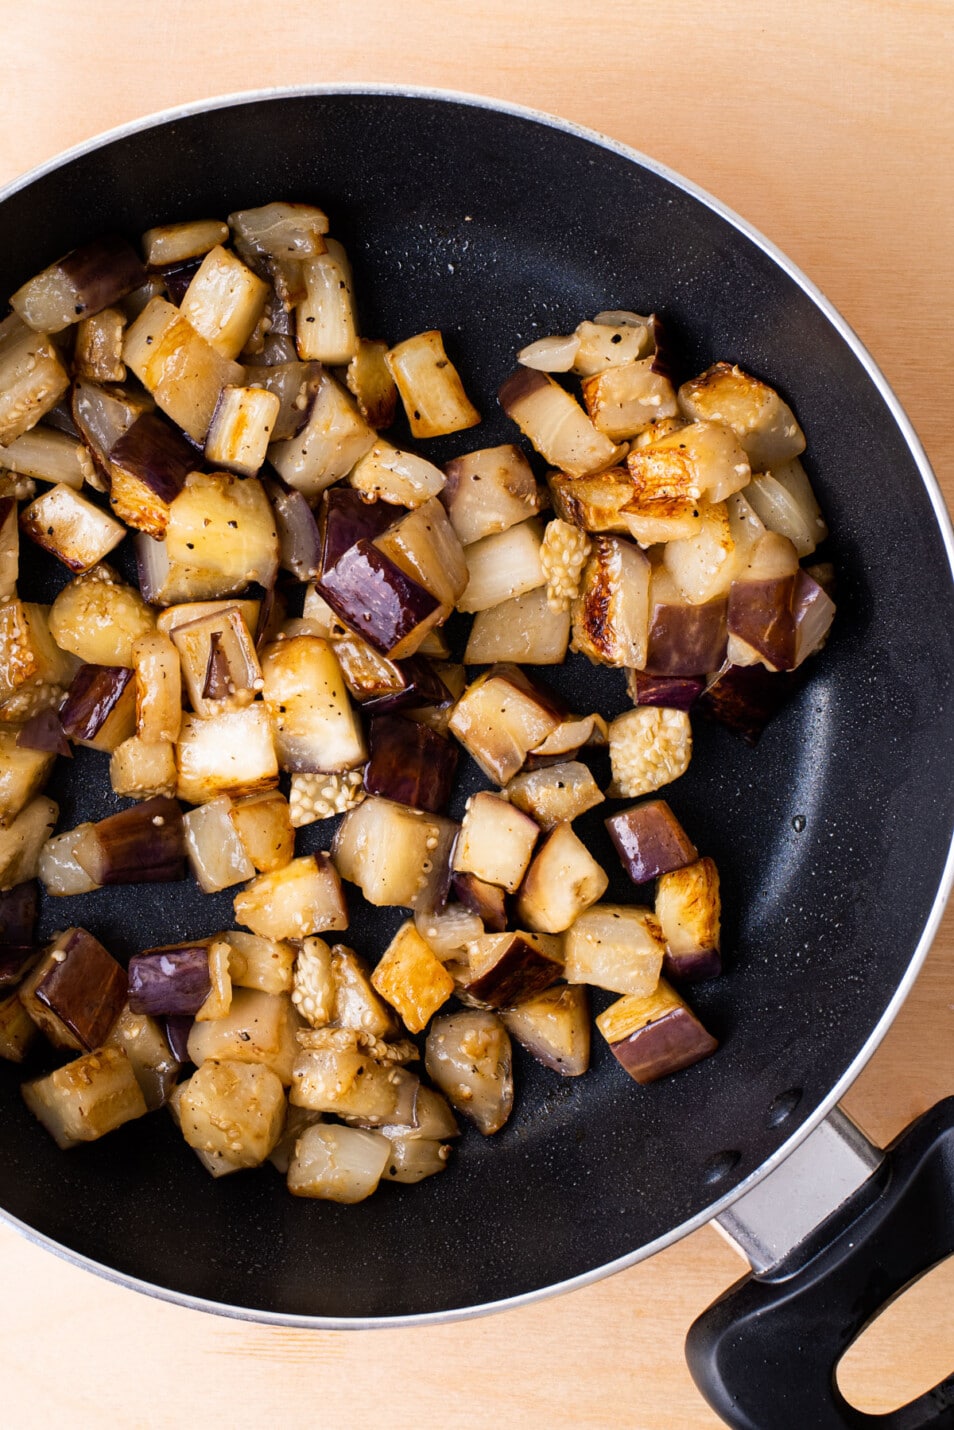 Cubed sauteed eggplant in a pan.